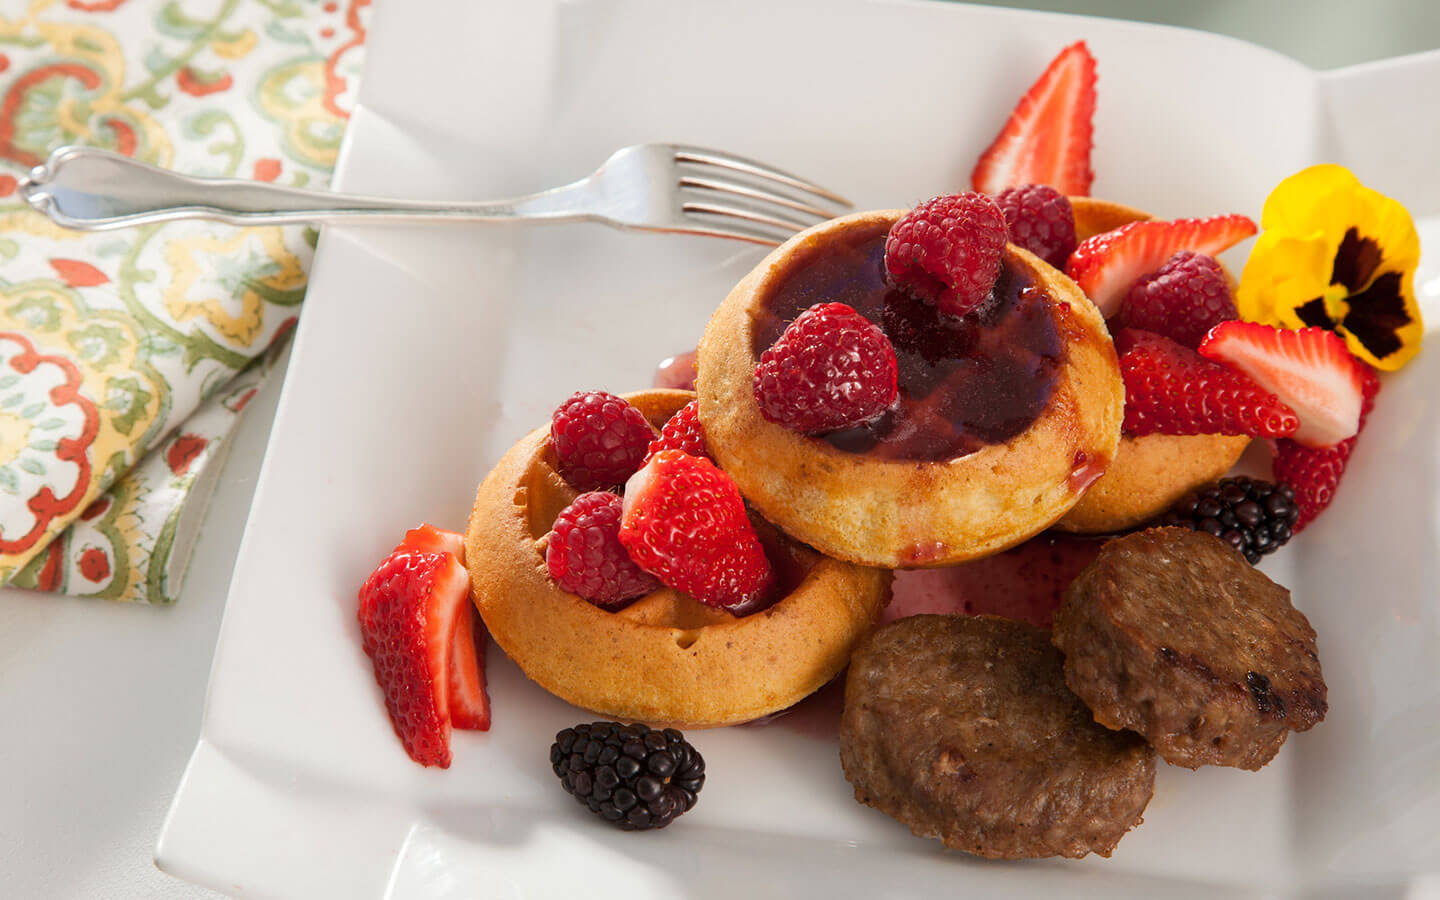 Indulge in gourmet breakfasts each morning as part of your stay